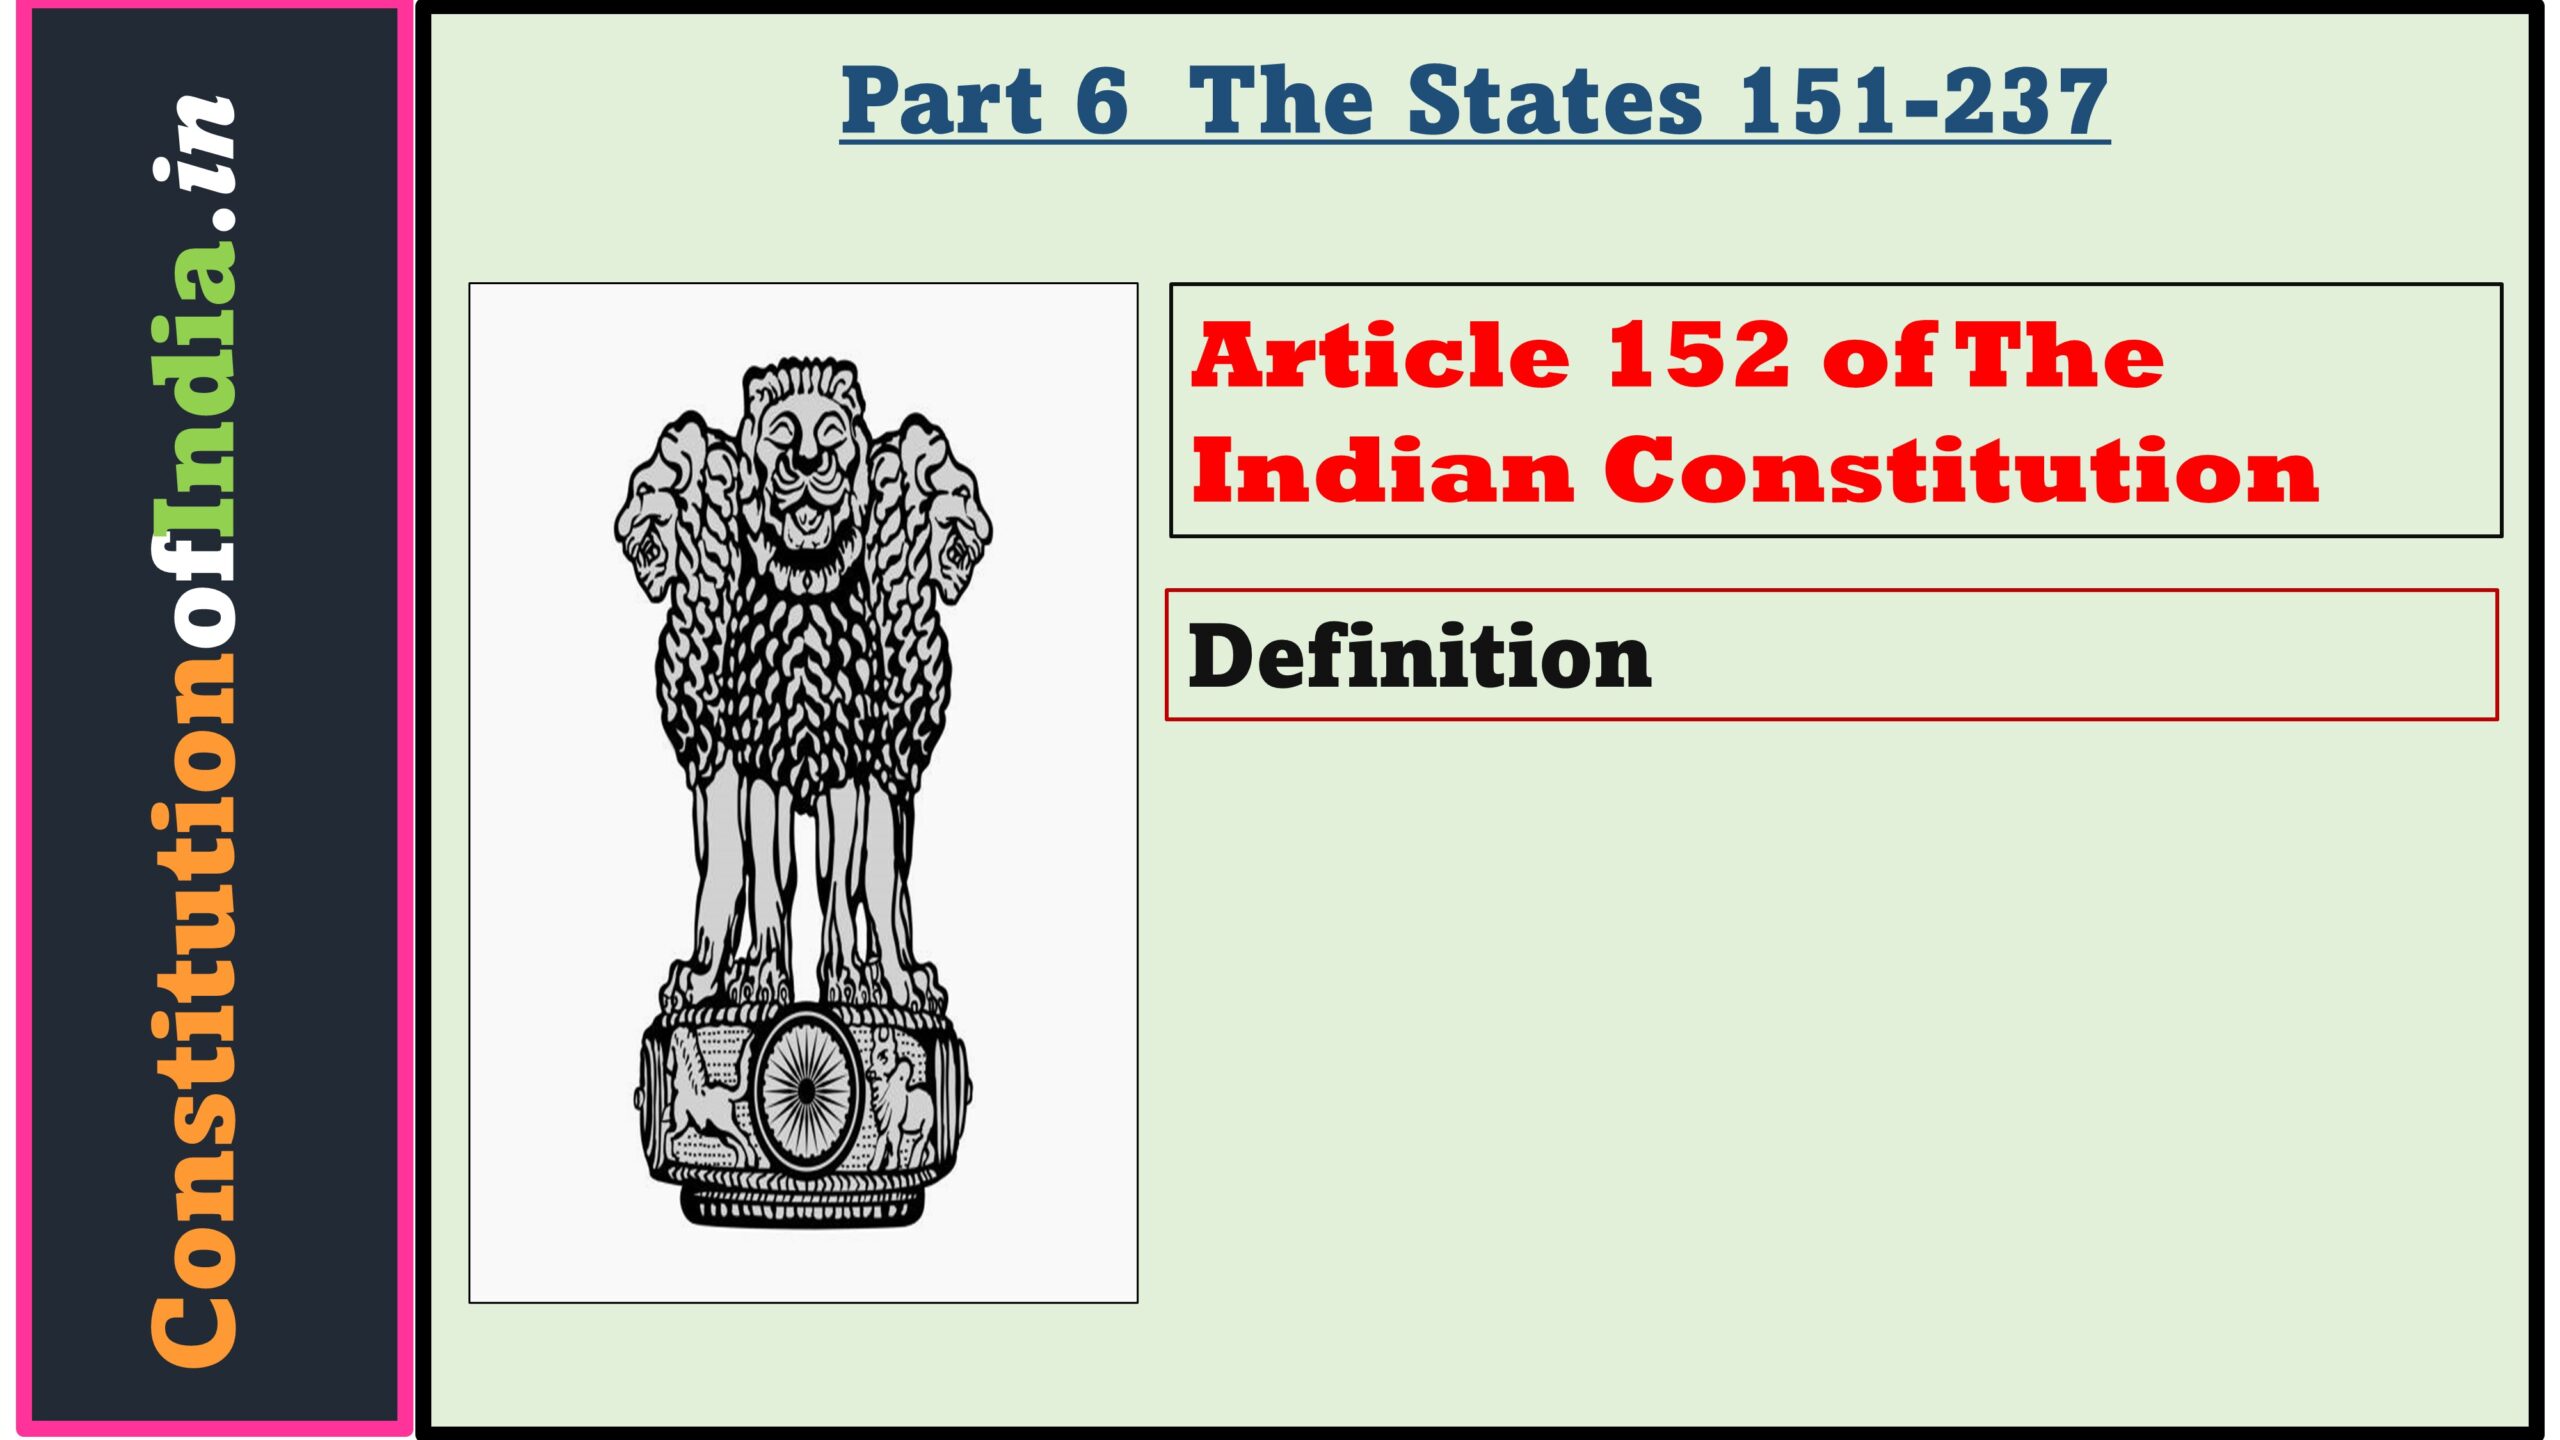 Article 152 of The Indian Constitution